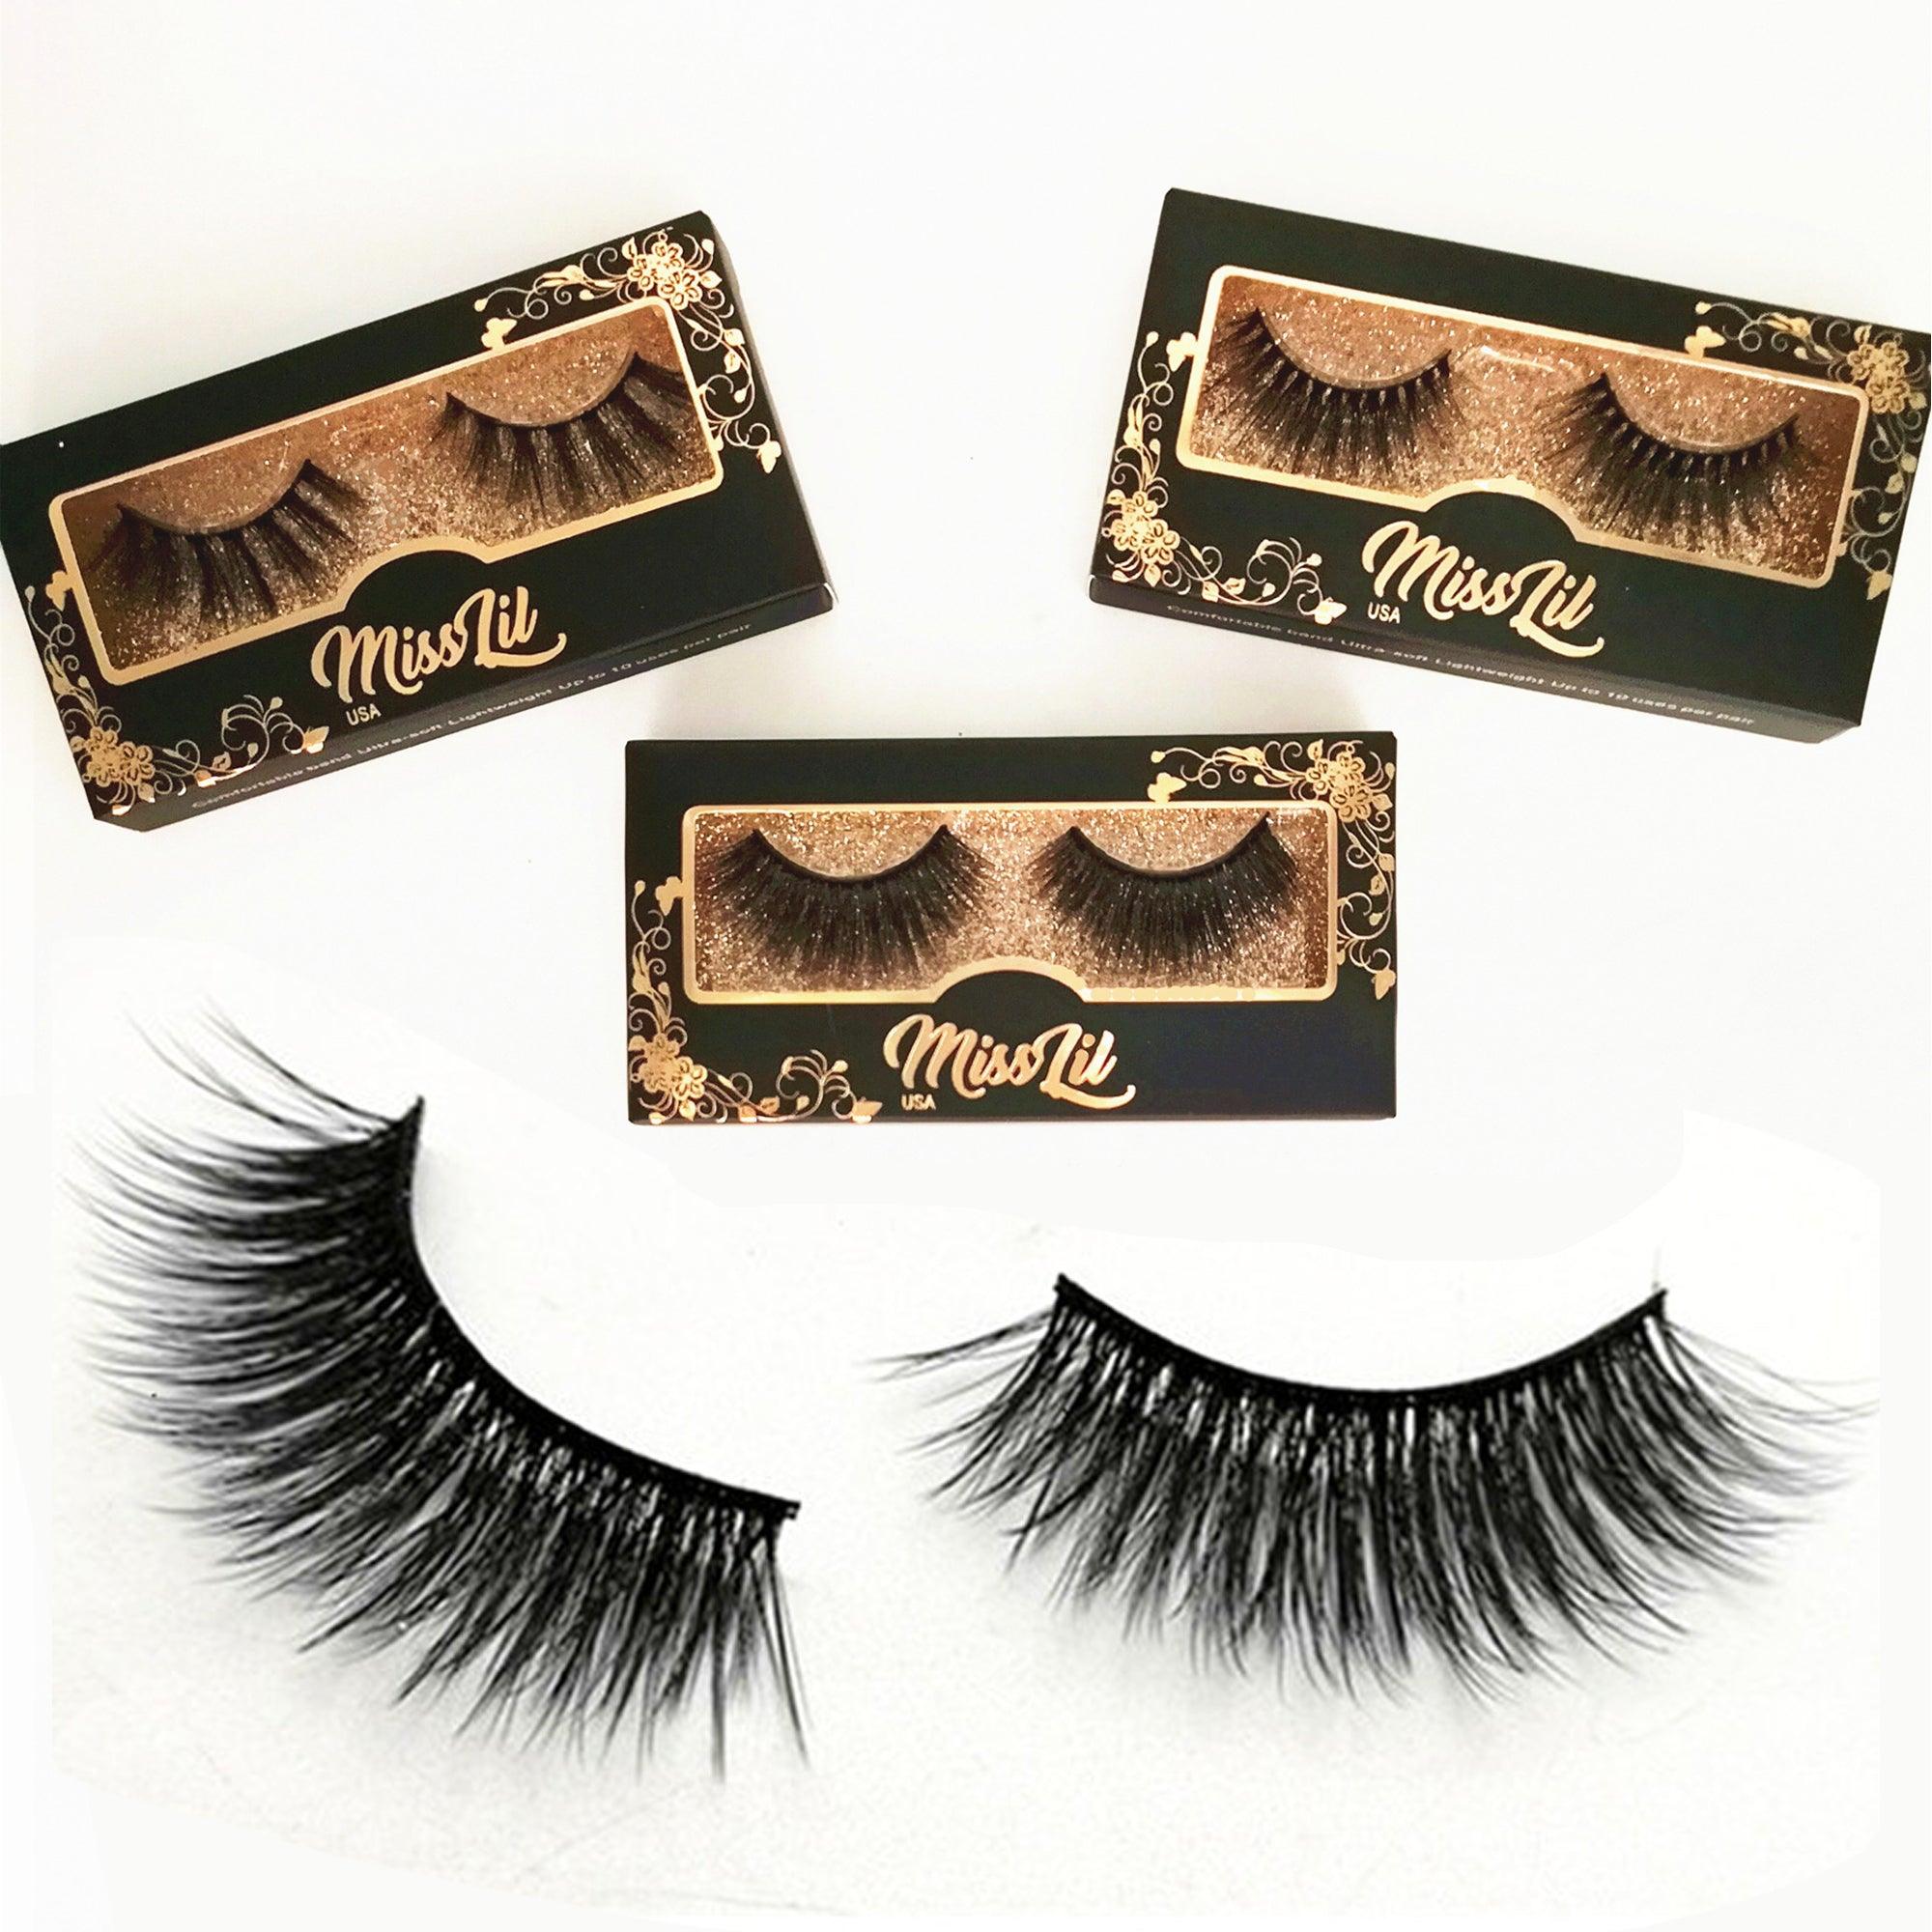 1-Pair Miss Lil USA Lashes #33 (Pack of 12) - Miss Lil USA Wholesale